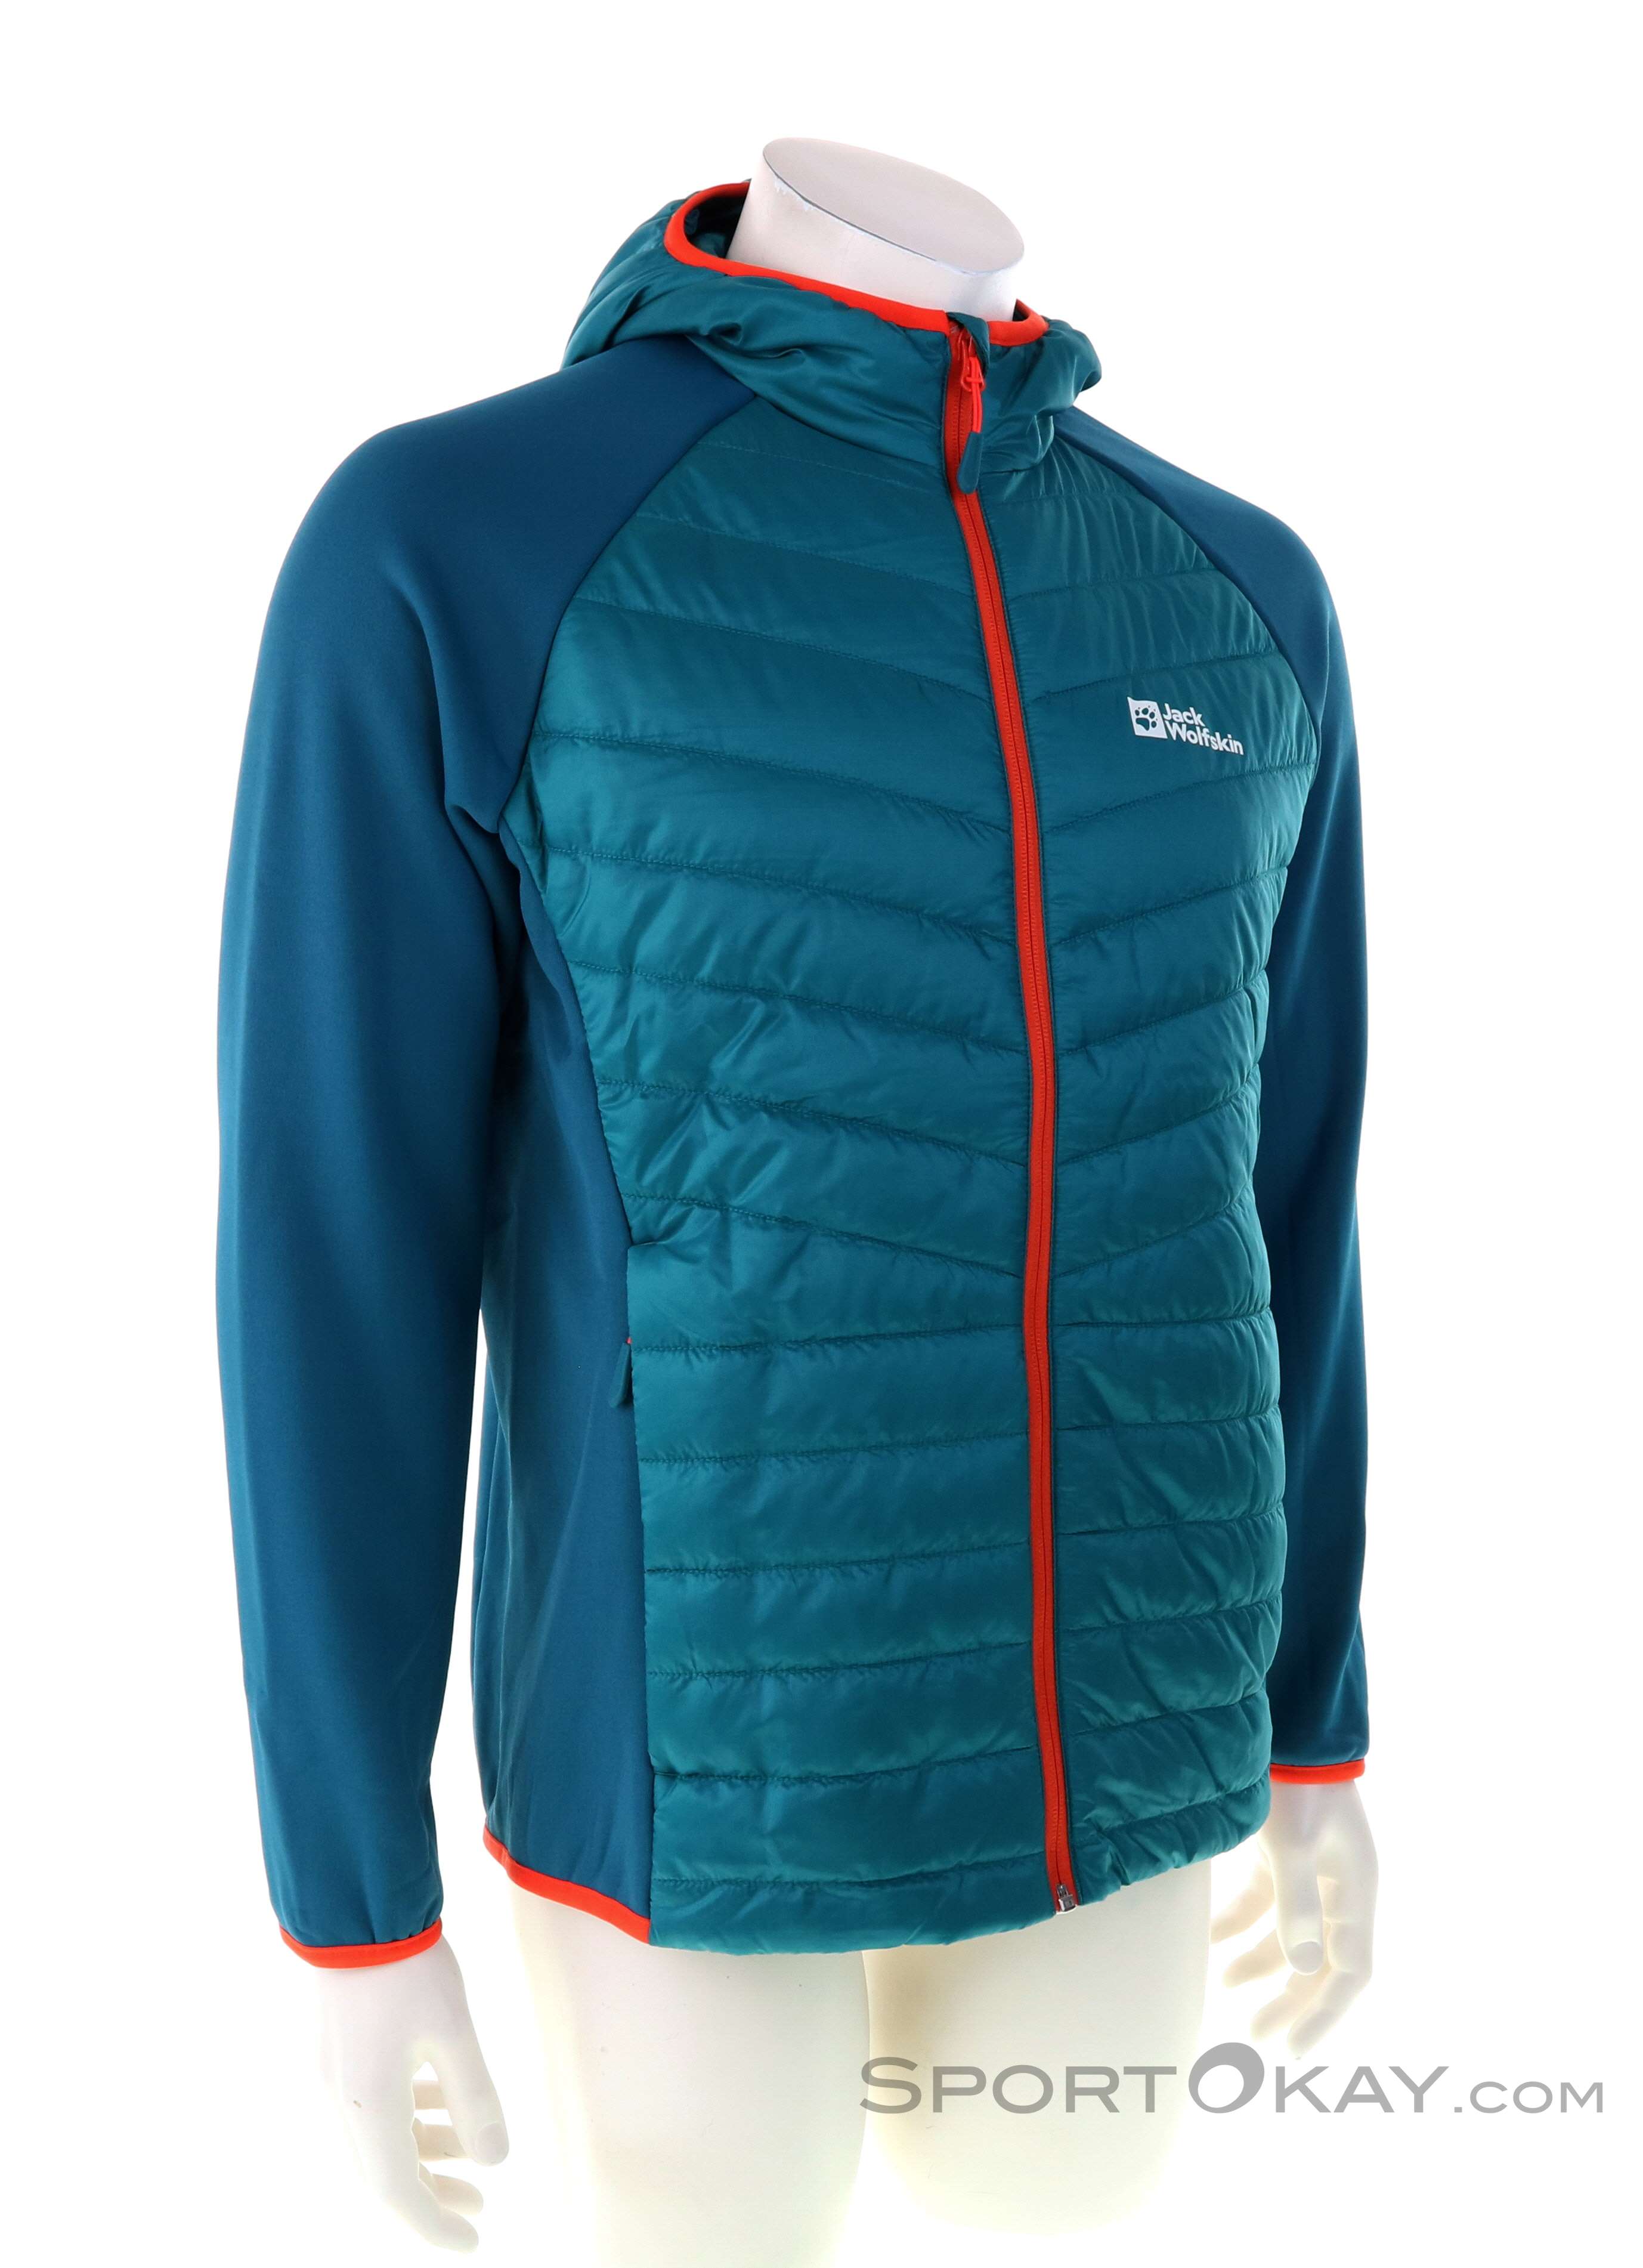 Jackets - Jack Clothing - Pro Hybrid All Wolfskin - Routeburn Outdoor Outdoor Jacket Mens - Outdoor